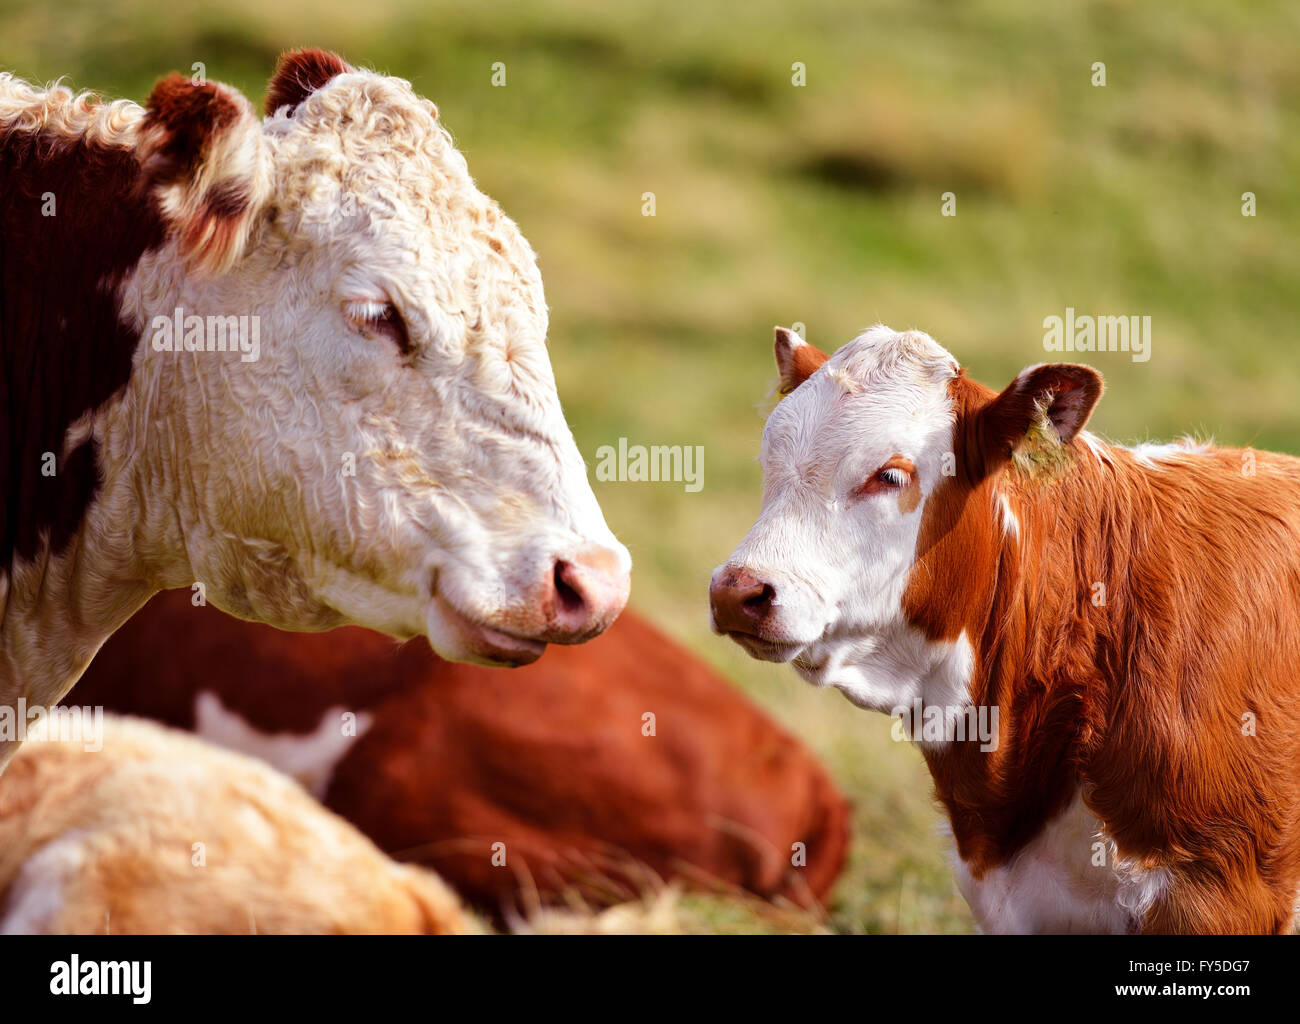 Cow and calf look at each other. Stock Photo